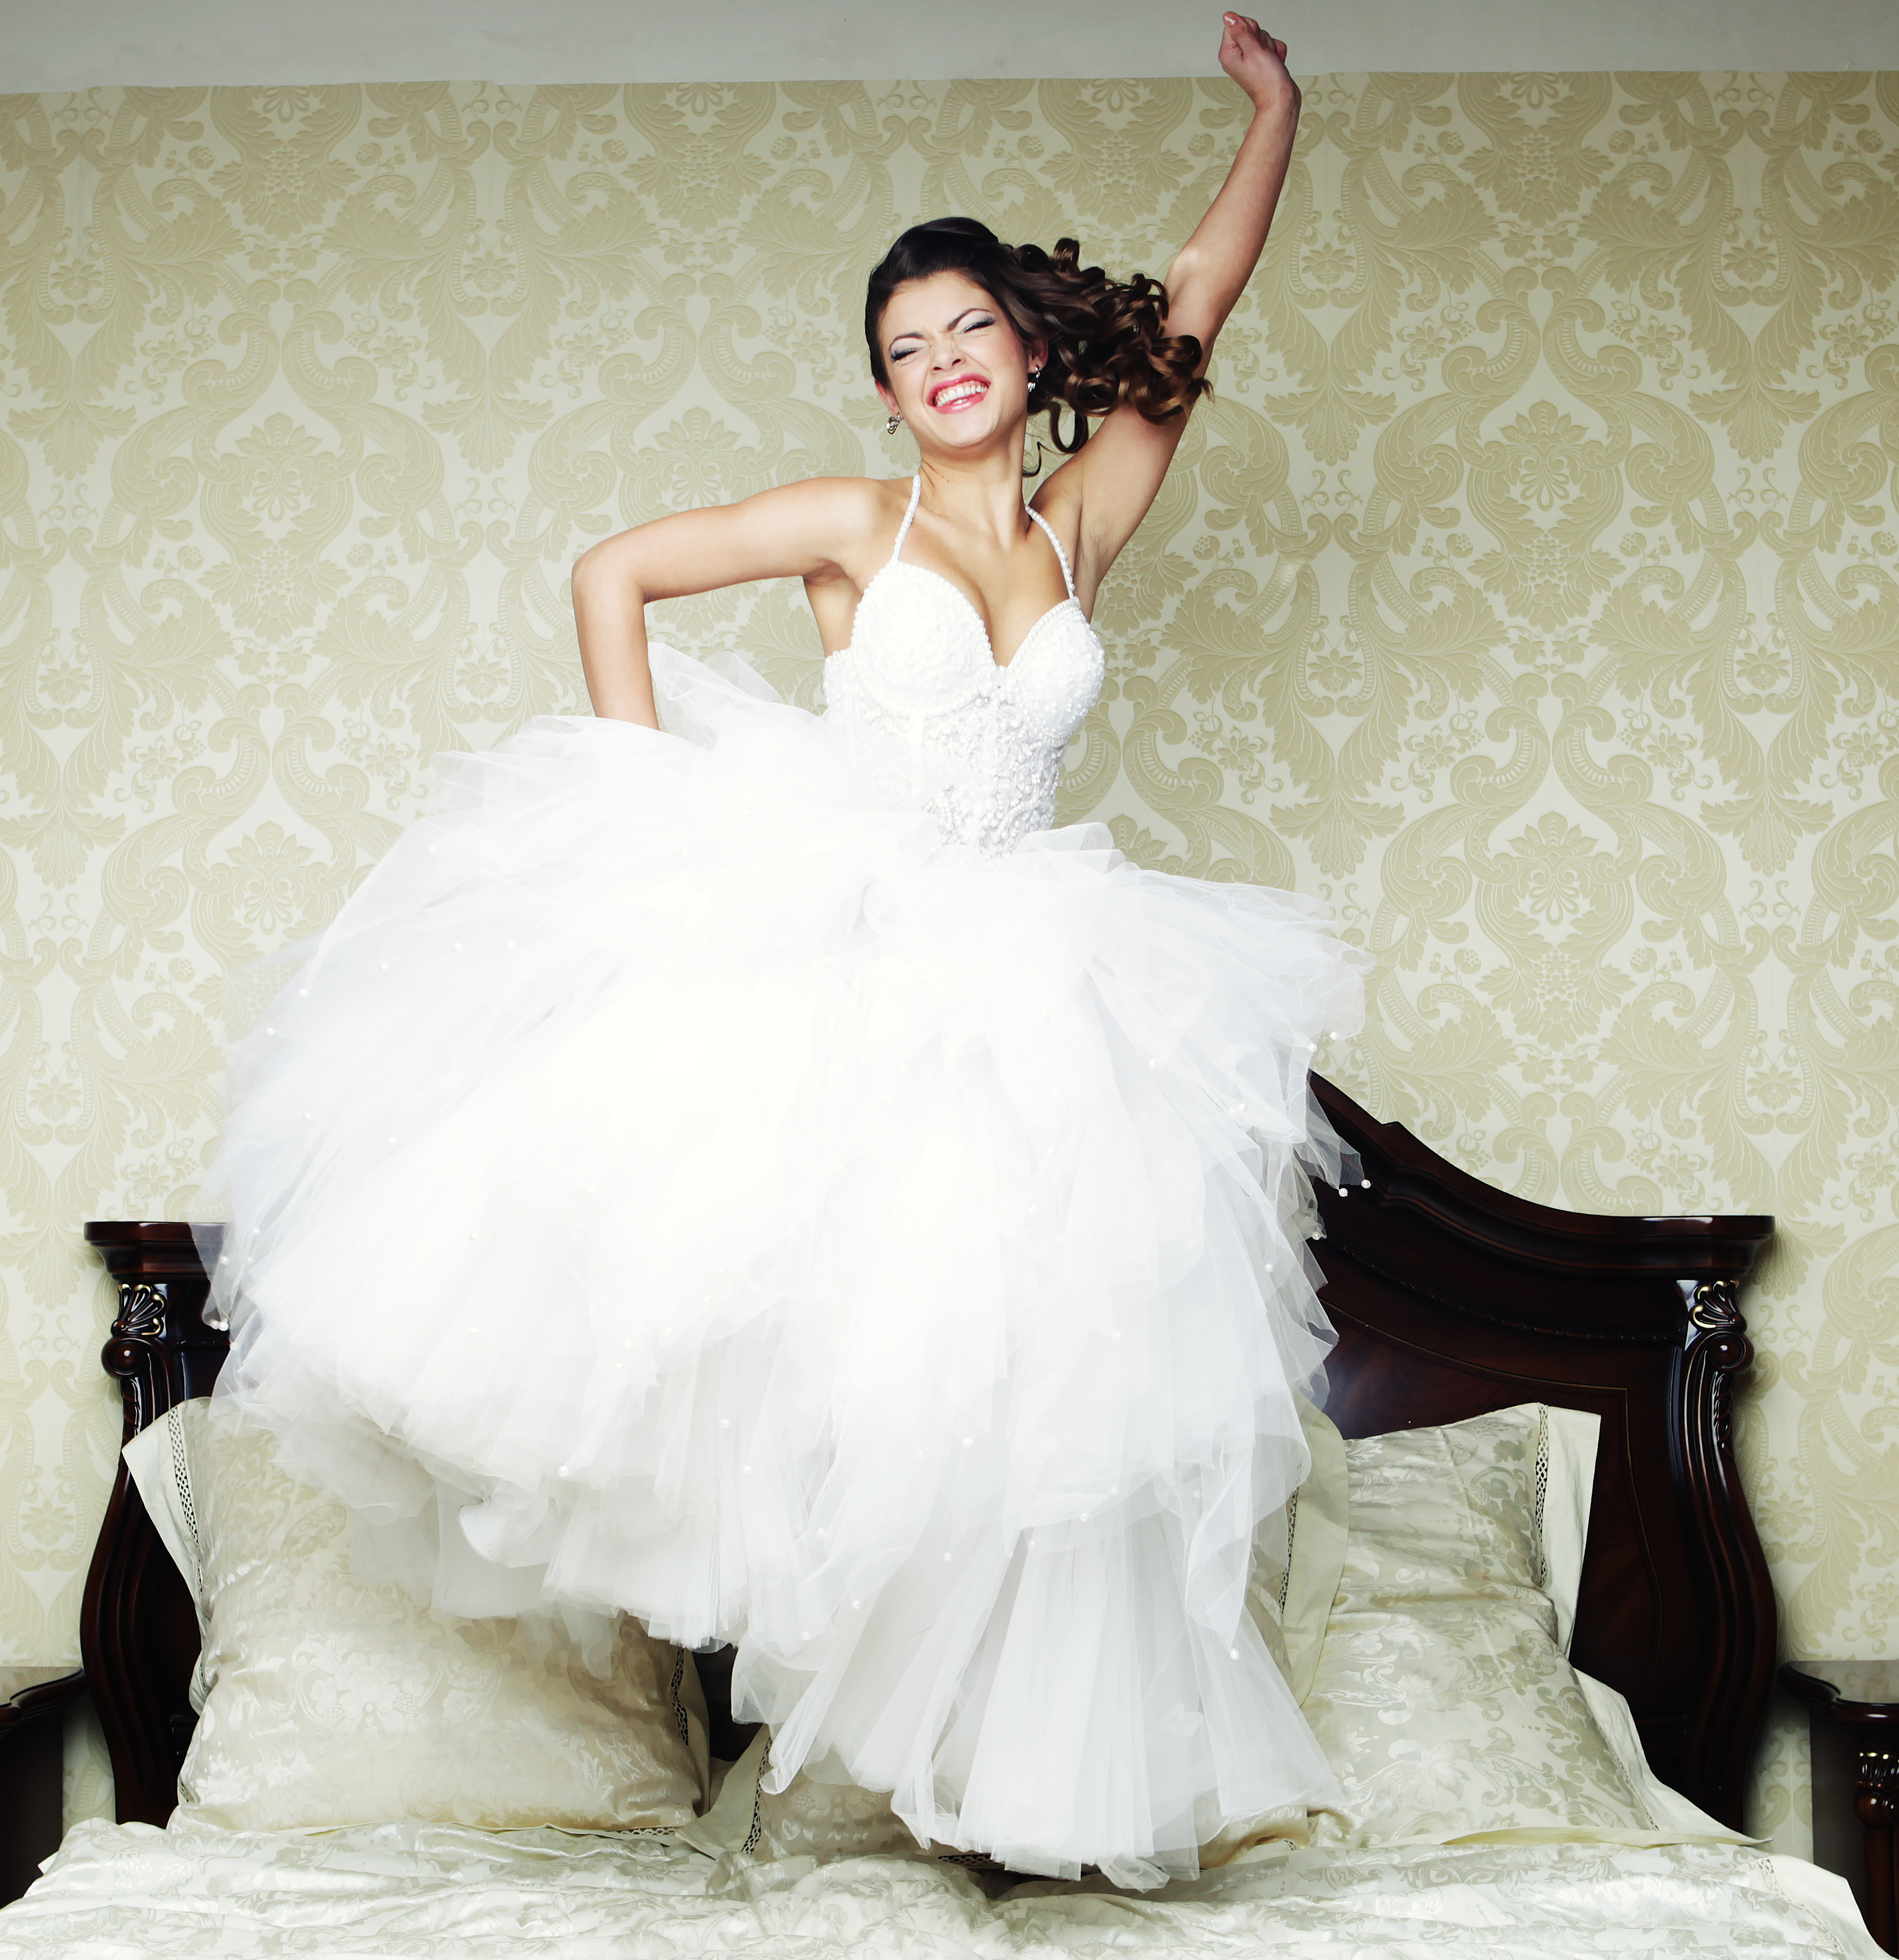 A happy bride jumping on a bed | Source: Shutterstock